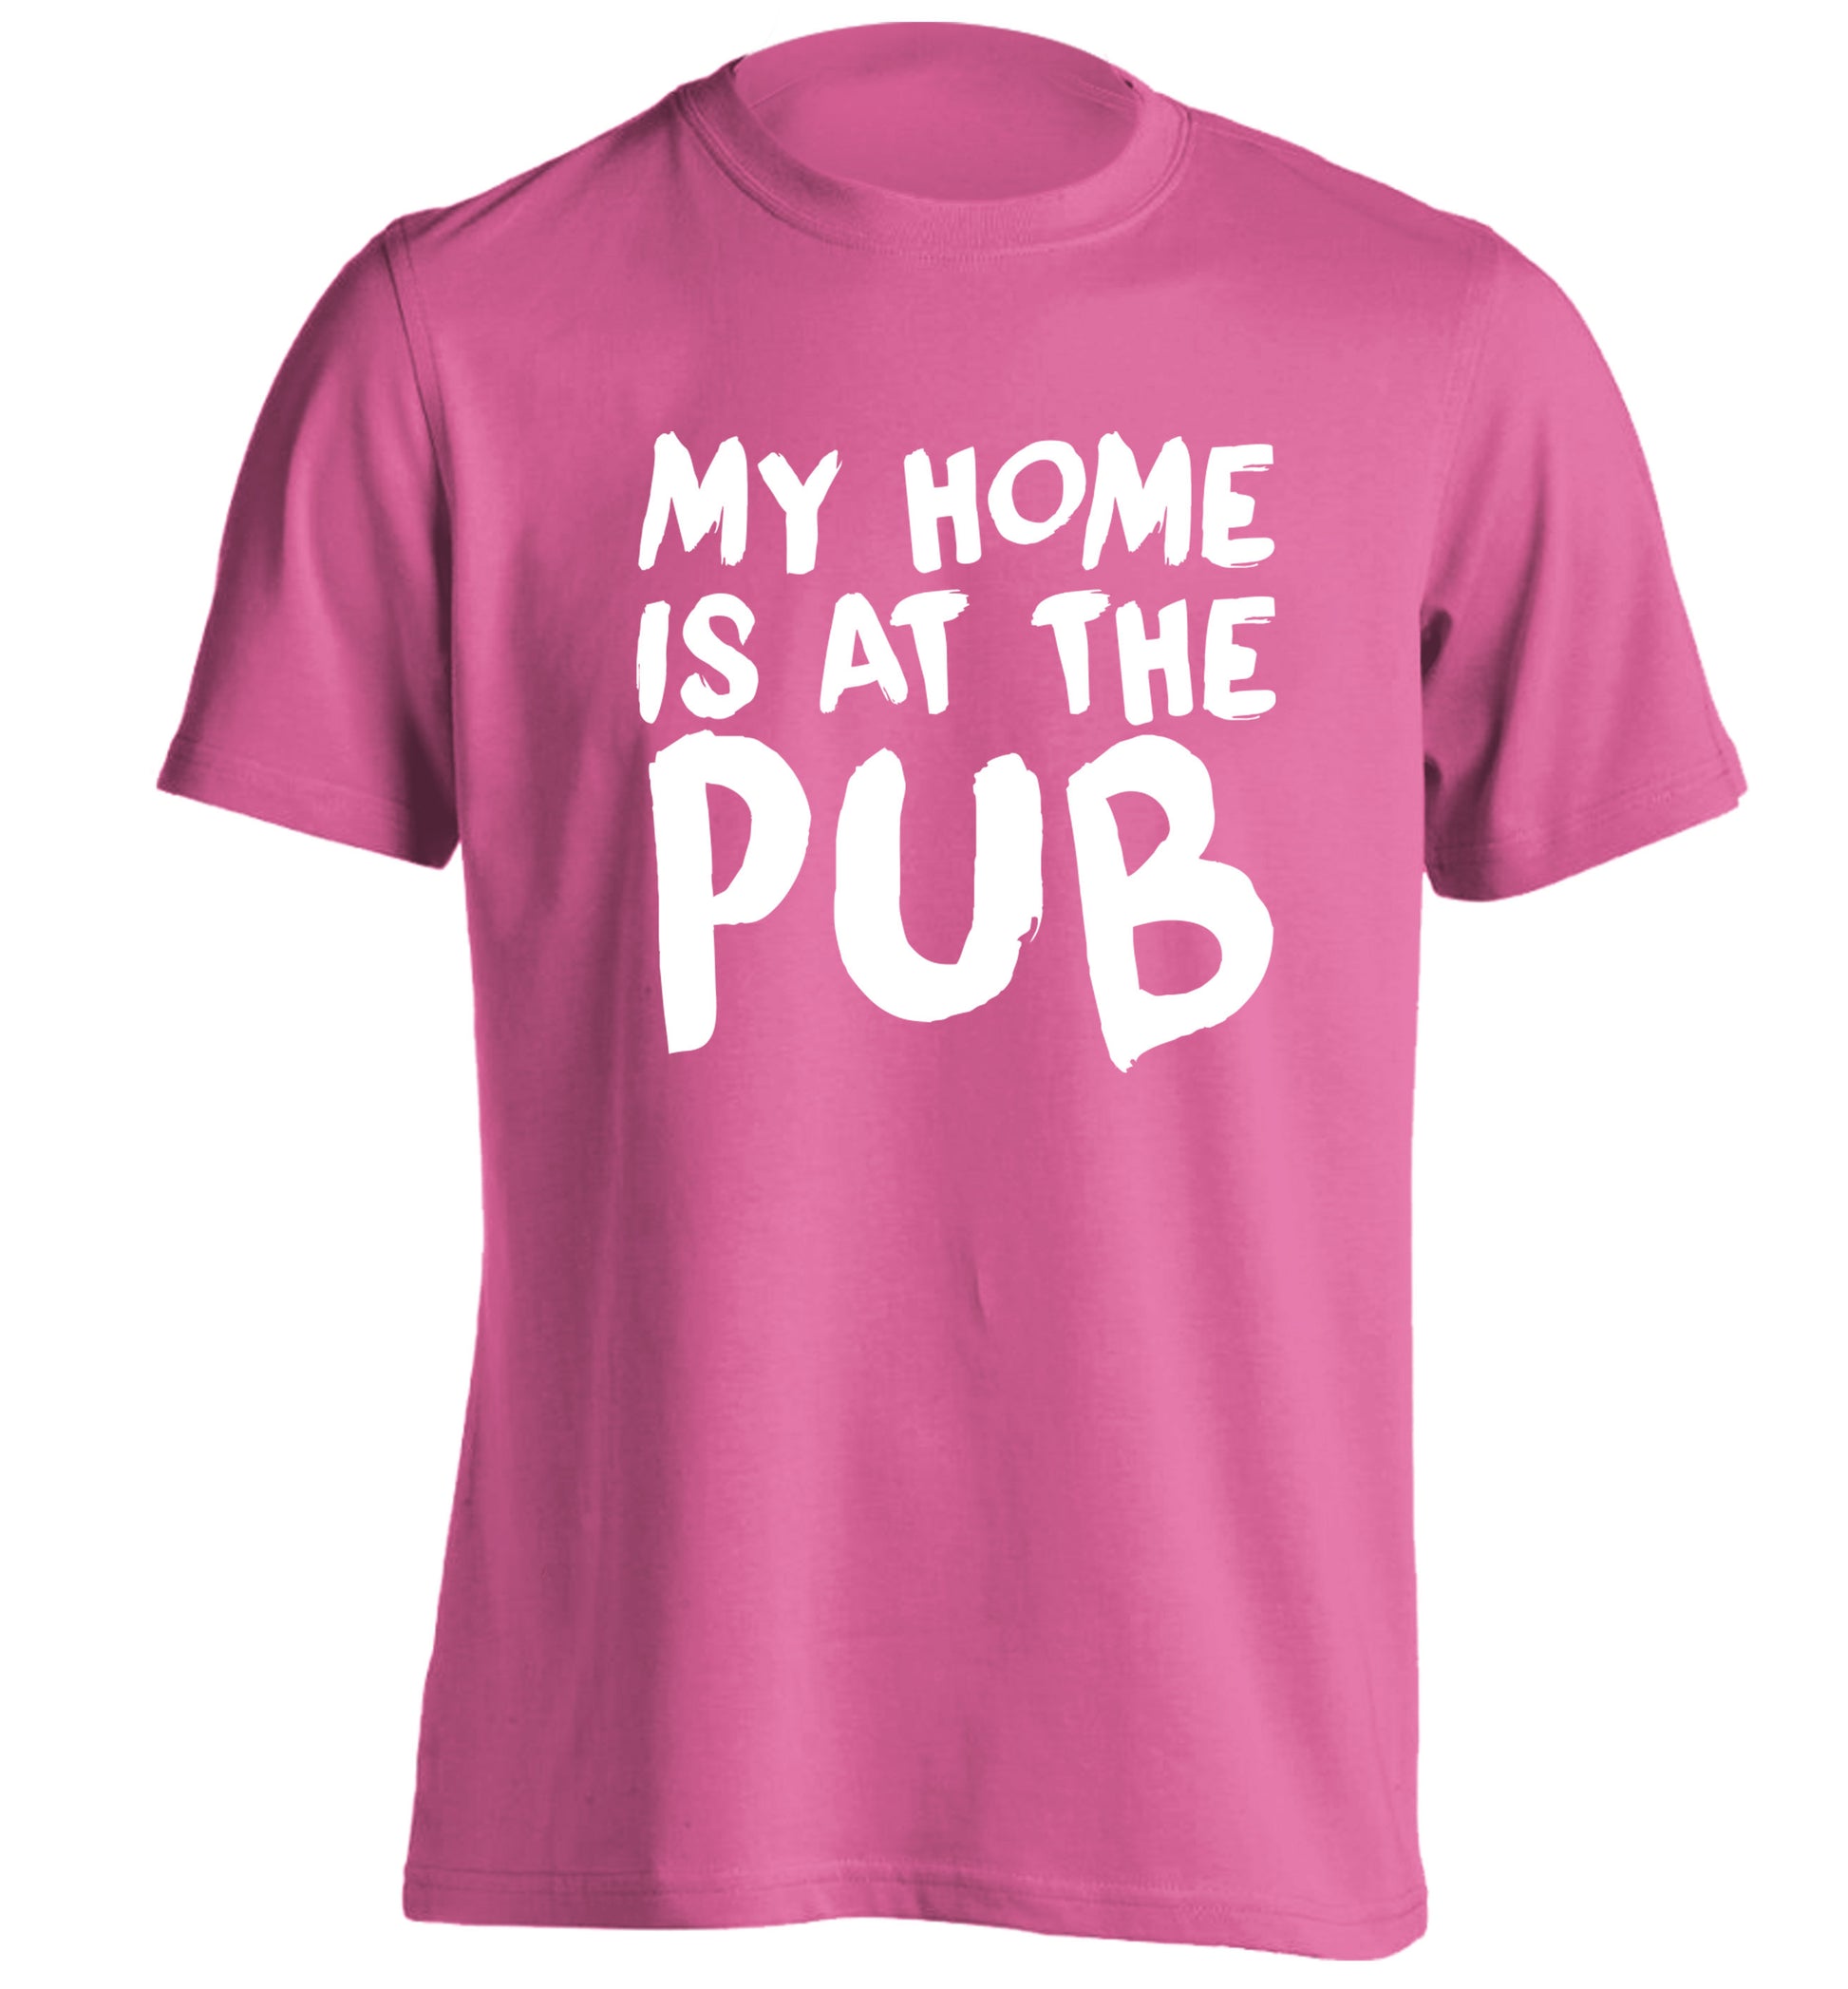 My home is at the pub adults unisex pink Tshirt 2XL